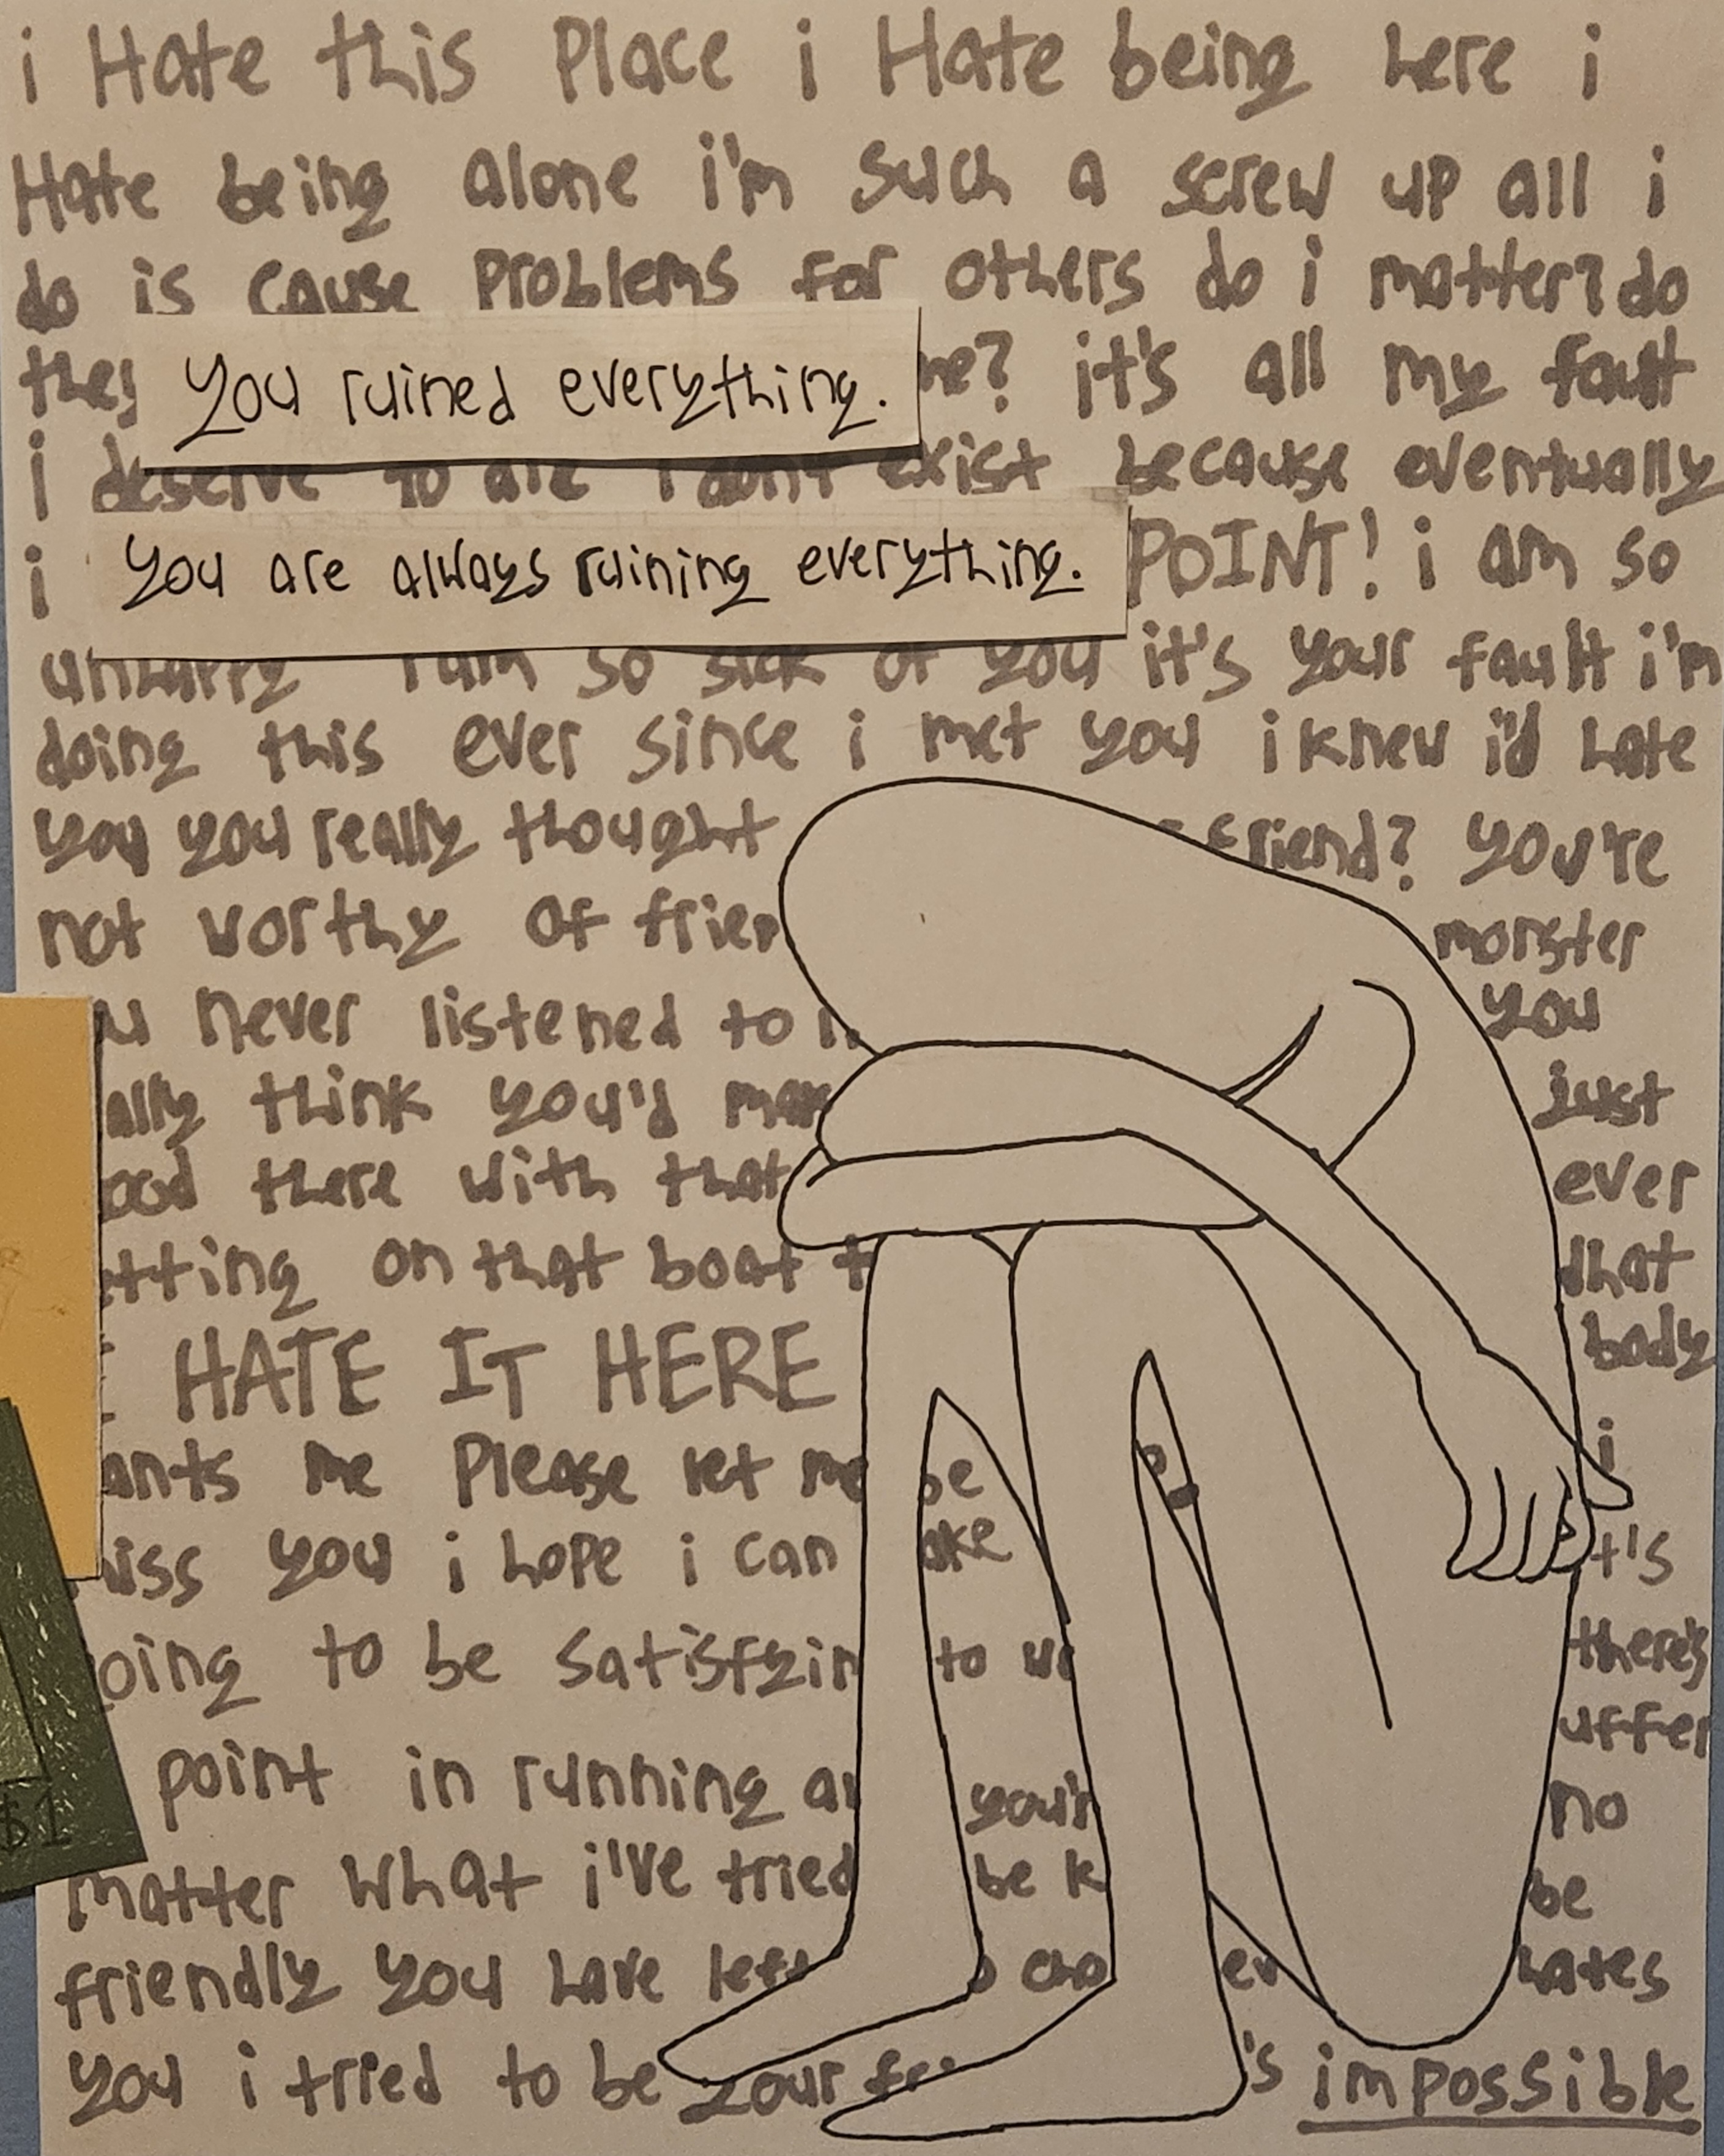 a drawing of the Buddy from buddy simulator 1984, sitting in the fetal position. the background is completely full of writing. it starts out as self-deprecation, but turns into berating someone (presumably Friendo) about halfway through, saying they don't deserve friendship and calling them a monster. in the foreground beside Buddy, there are two lines of text cut-and-pasted from blank paper. they read 'you ruined everything.' and 'you are always ruining everything.'